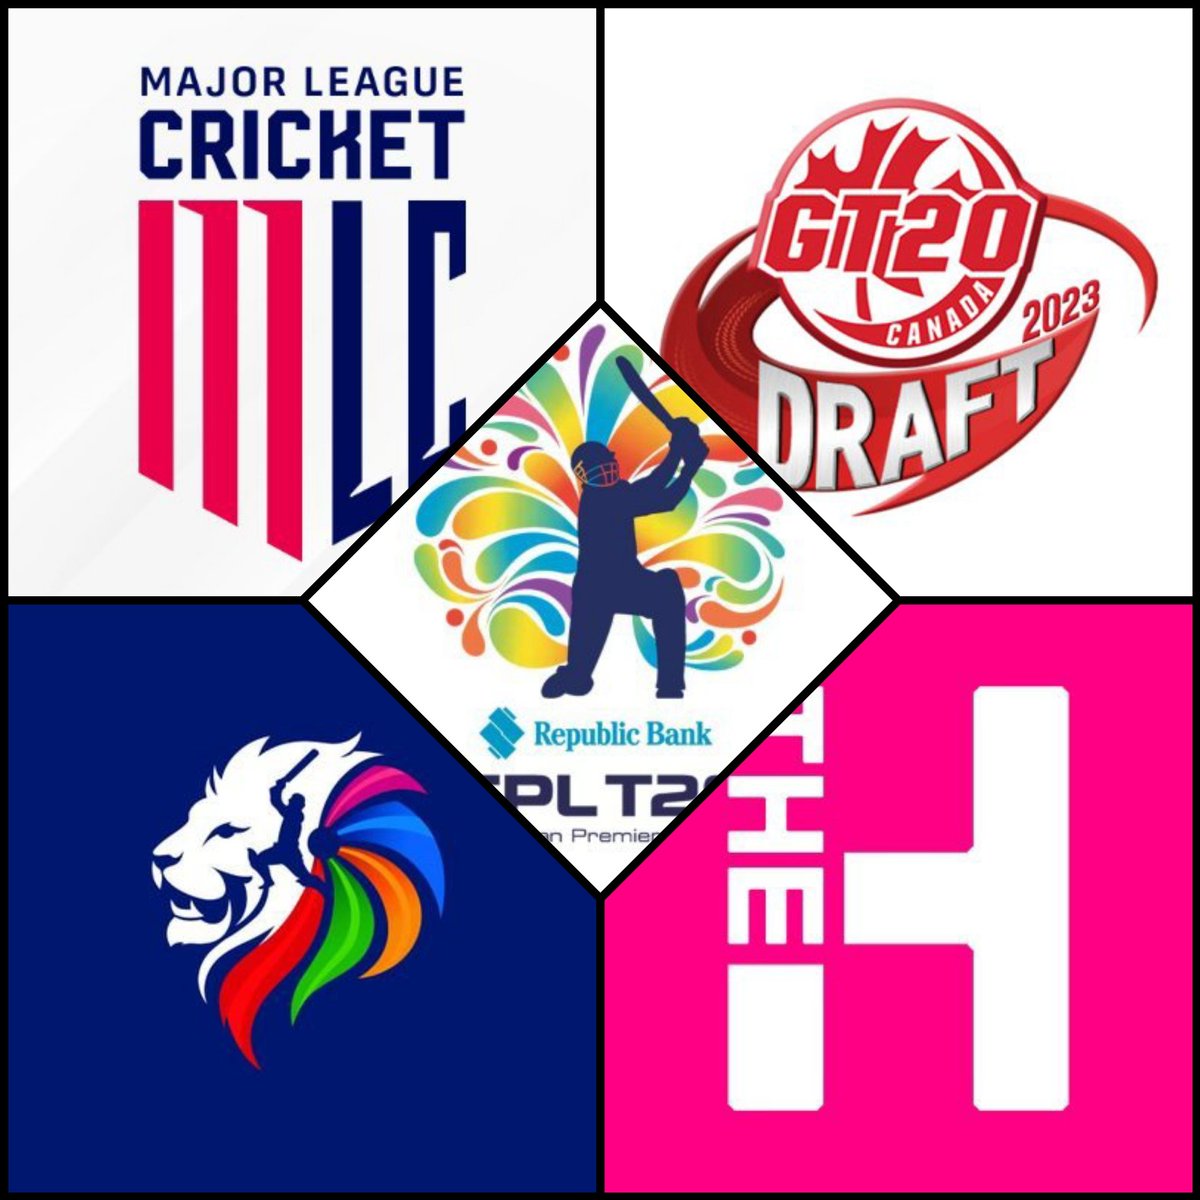 Franchise Leagues in July&Aug-

MLC-
13th July-30th July

GT20 Canada-
20th July- 6th Aug

LPL-
31st July - 22nd Aug

The Hundred- 
1st Aug - 27th Aug

CPL-
16th Aug - 24th Sept

#MajorLeagueCricket #GT20Canada #LPL2023 #TheHundred #CPL23